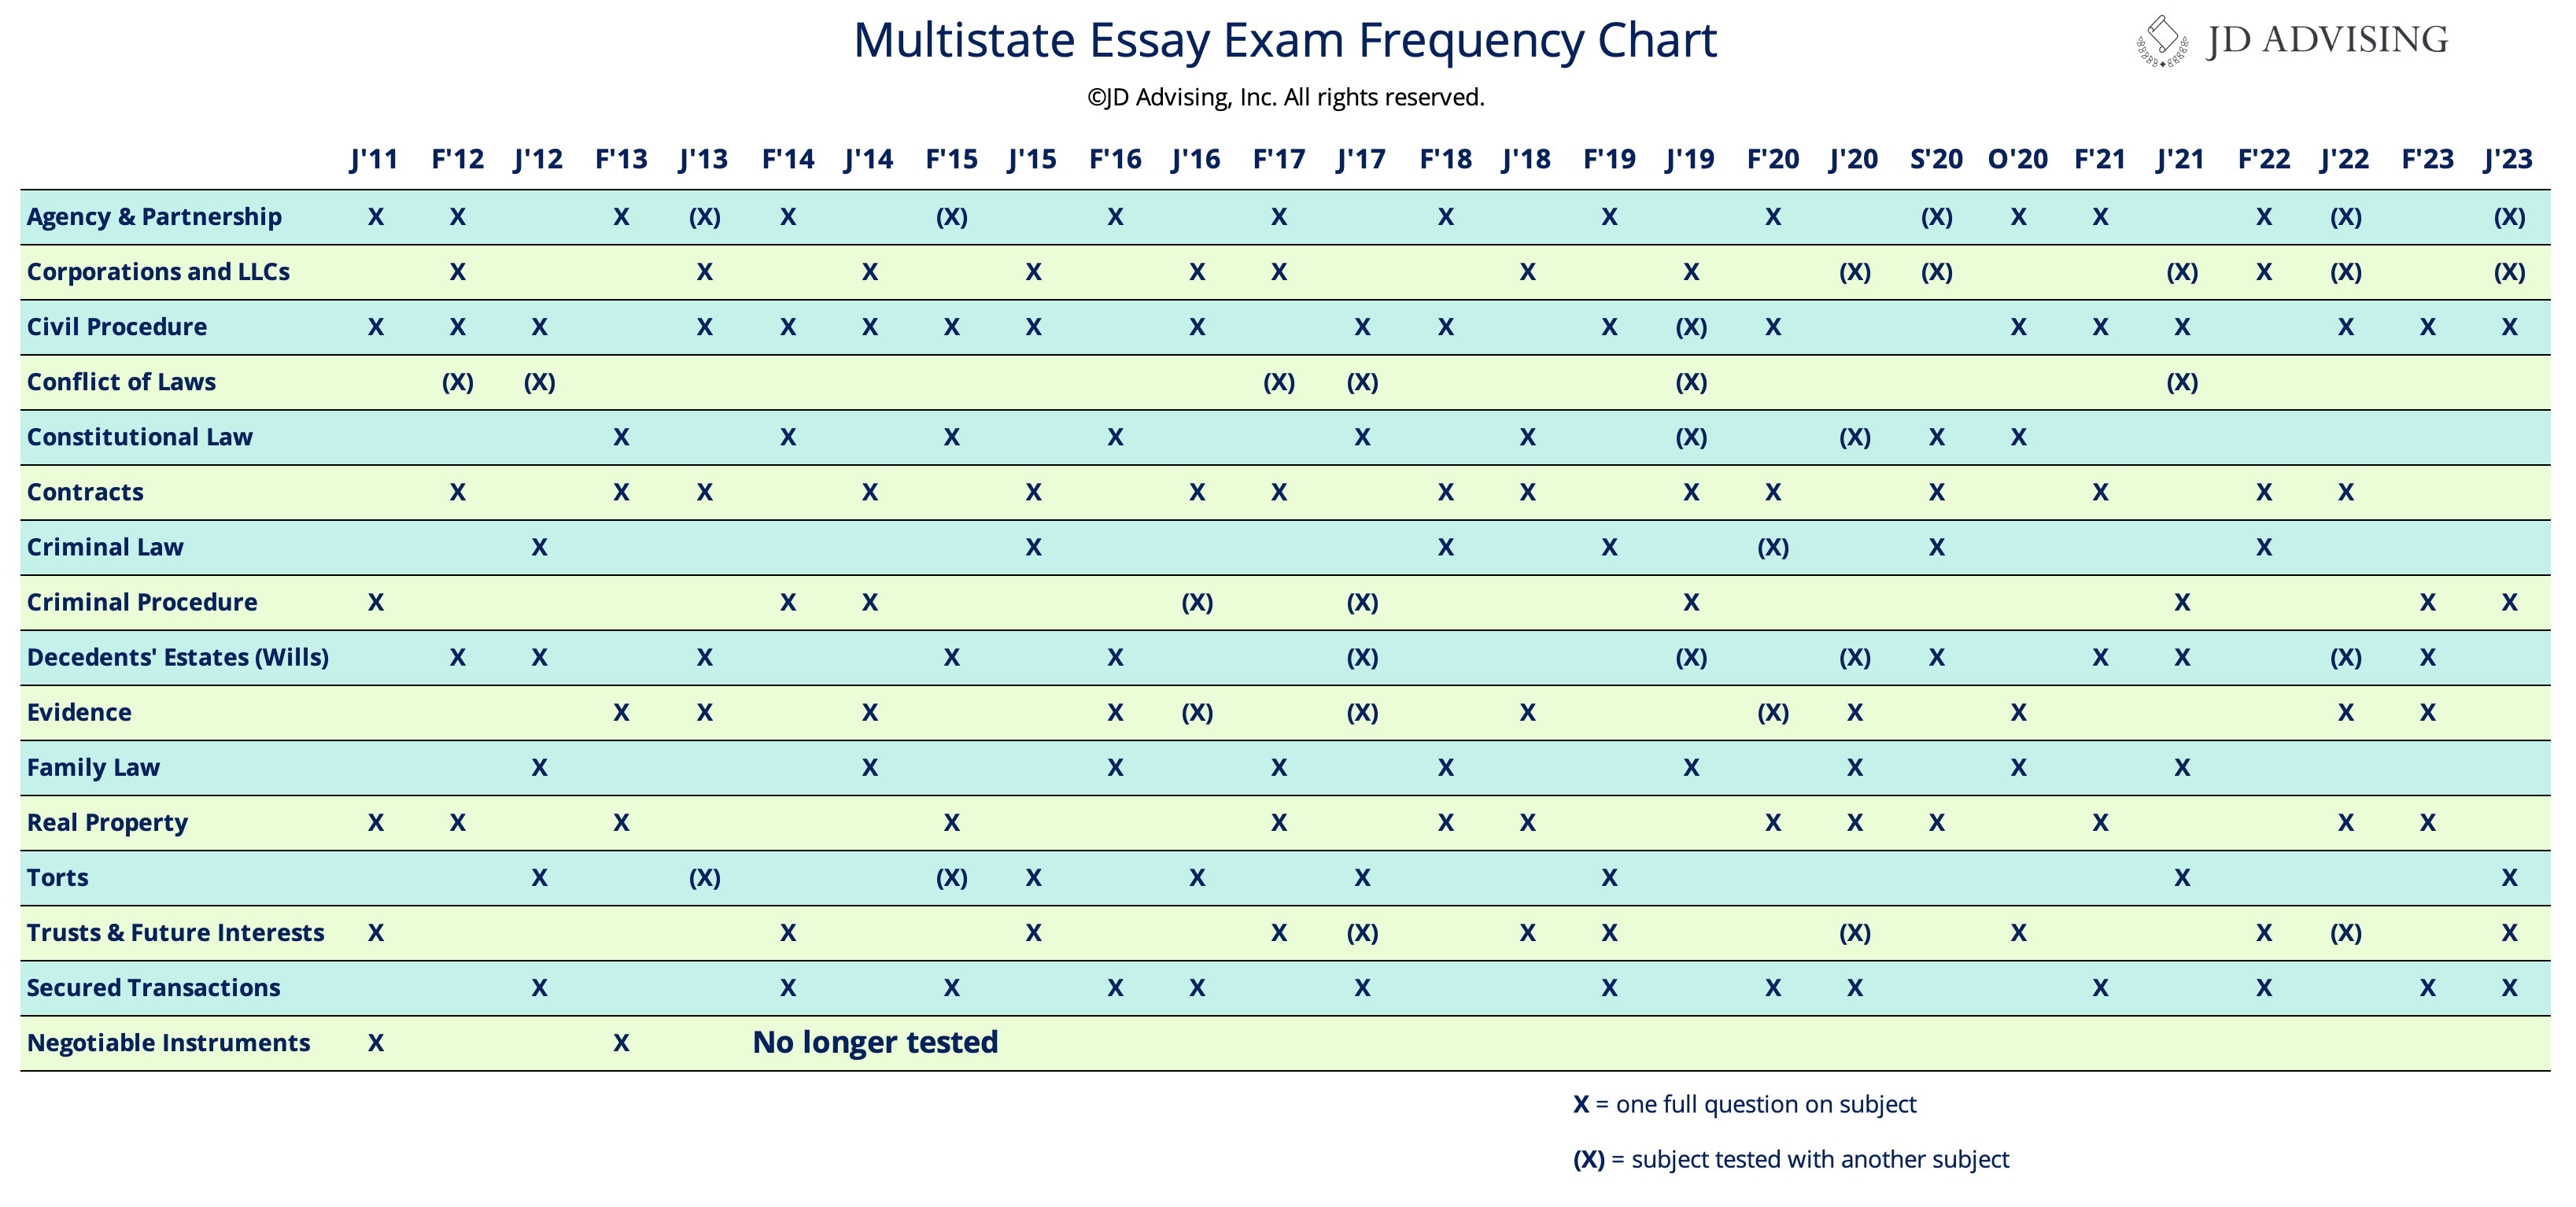 jd advising essay frequency